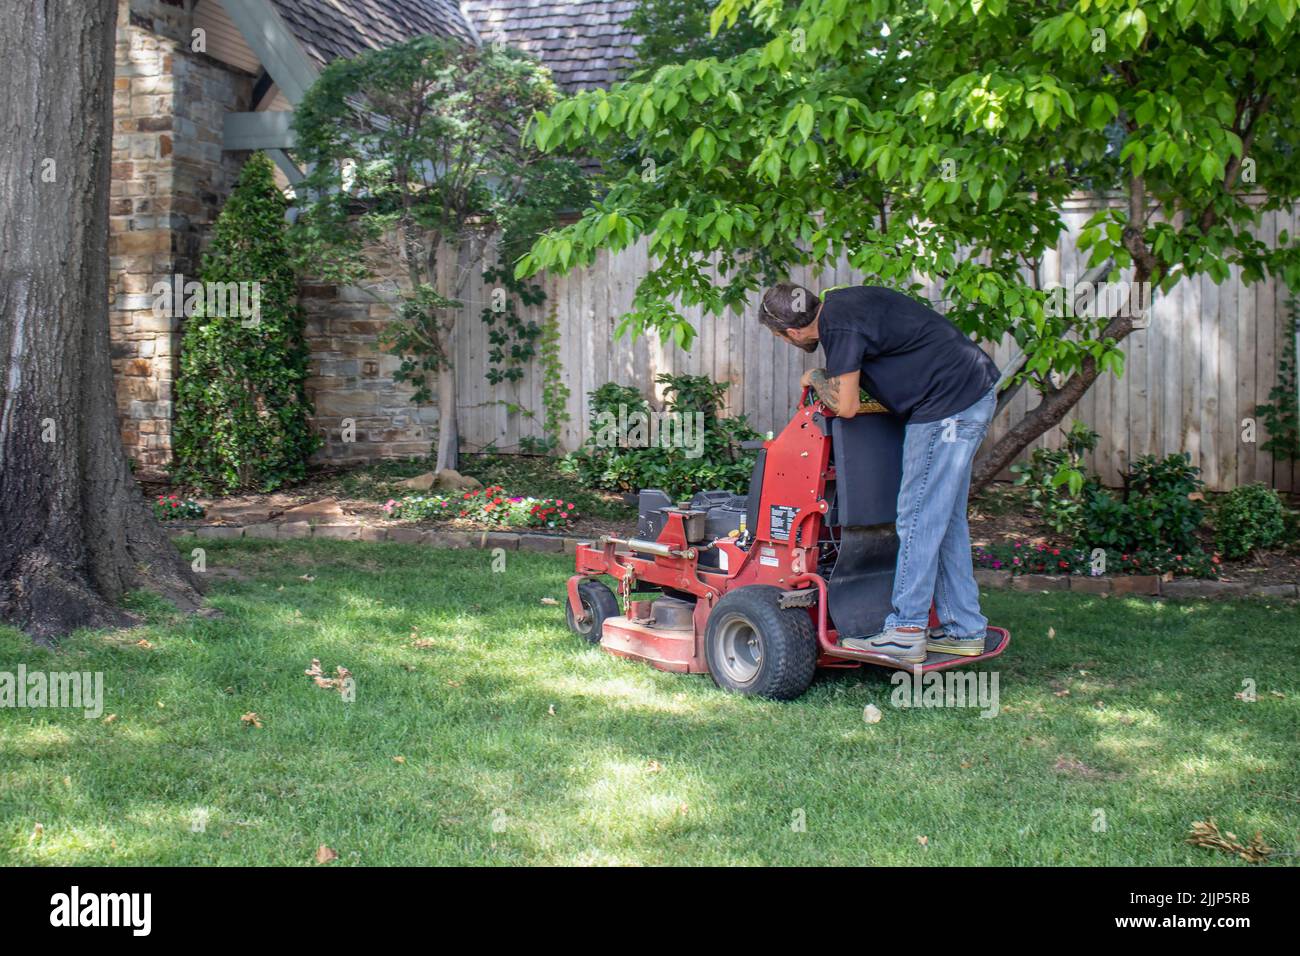 Tulsa USA 6 22 2018 Man with tattoos on standing commercial lawnmower cutting a close circle around tree and flowerbeds in upscale neighborhood - sele Stock Photo